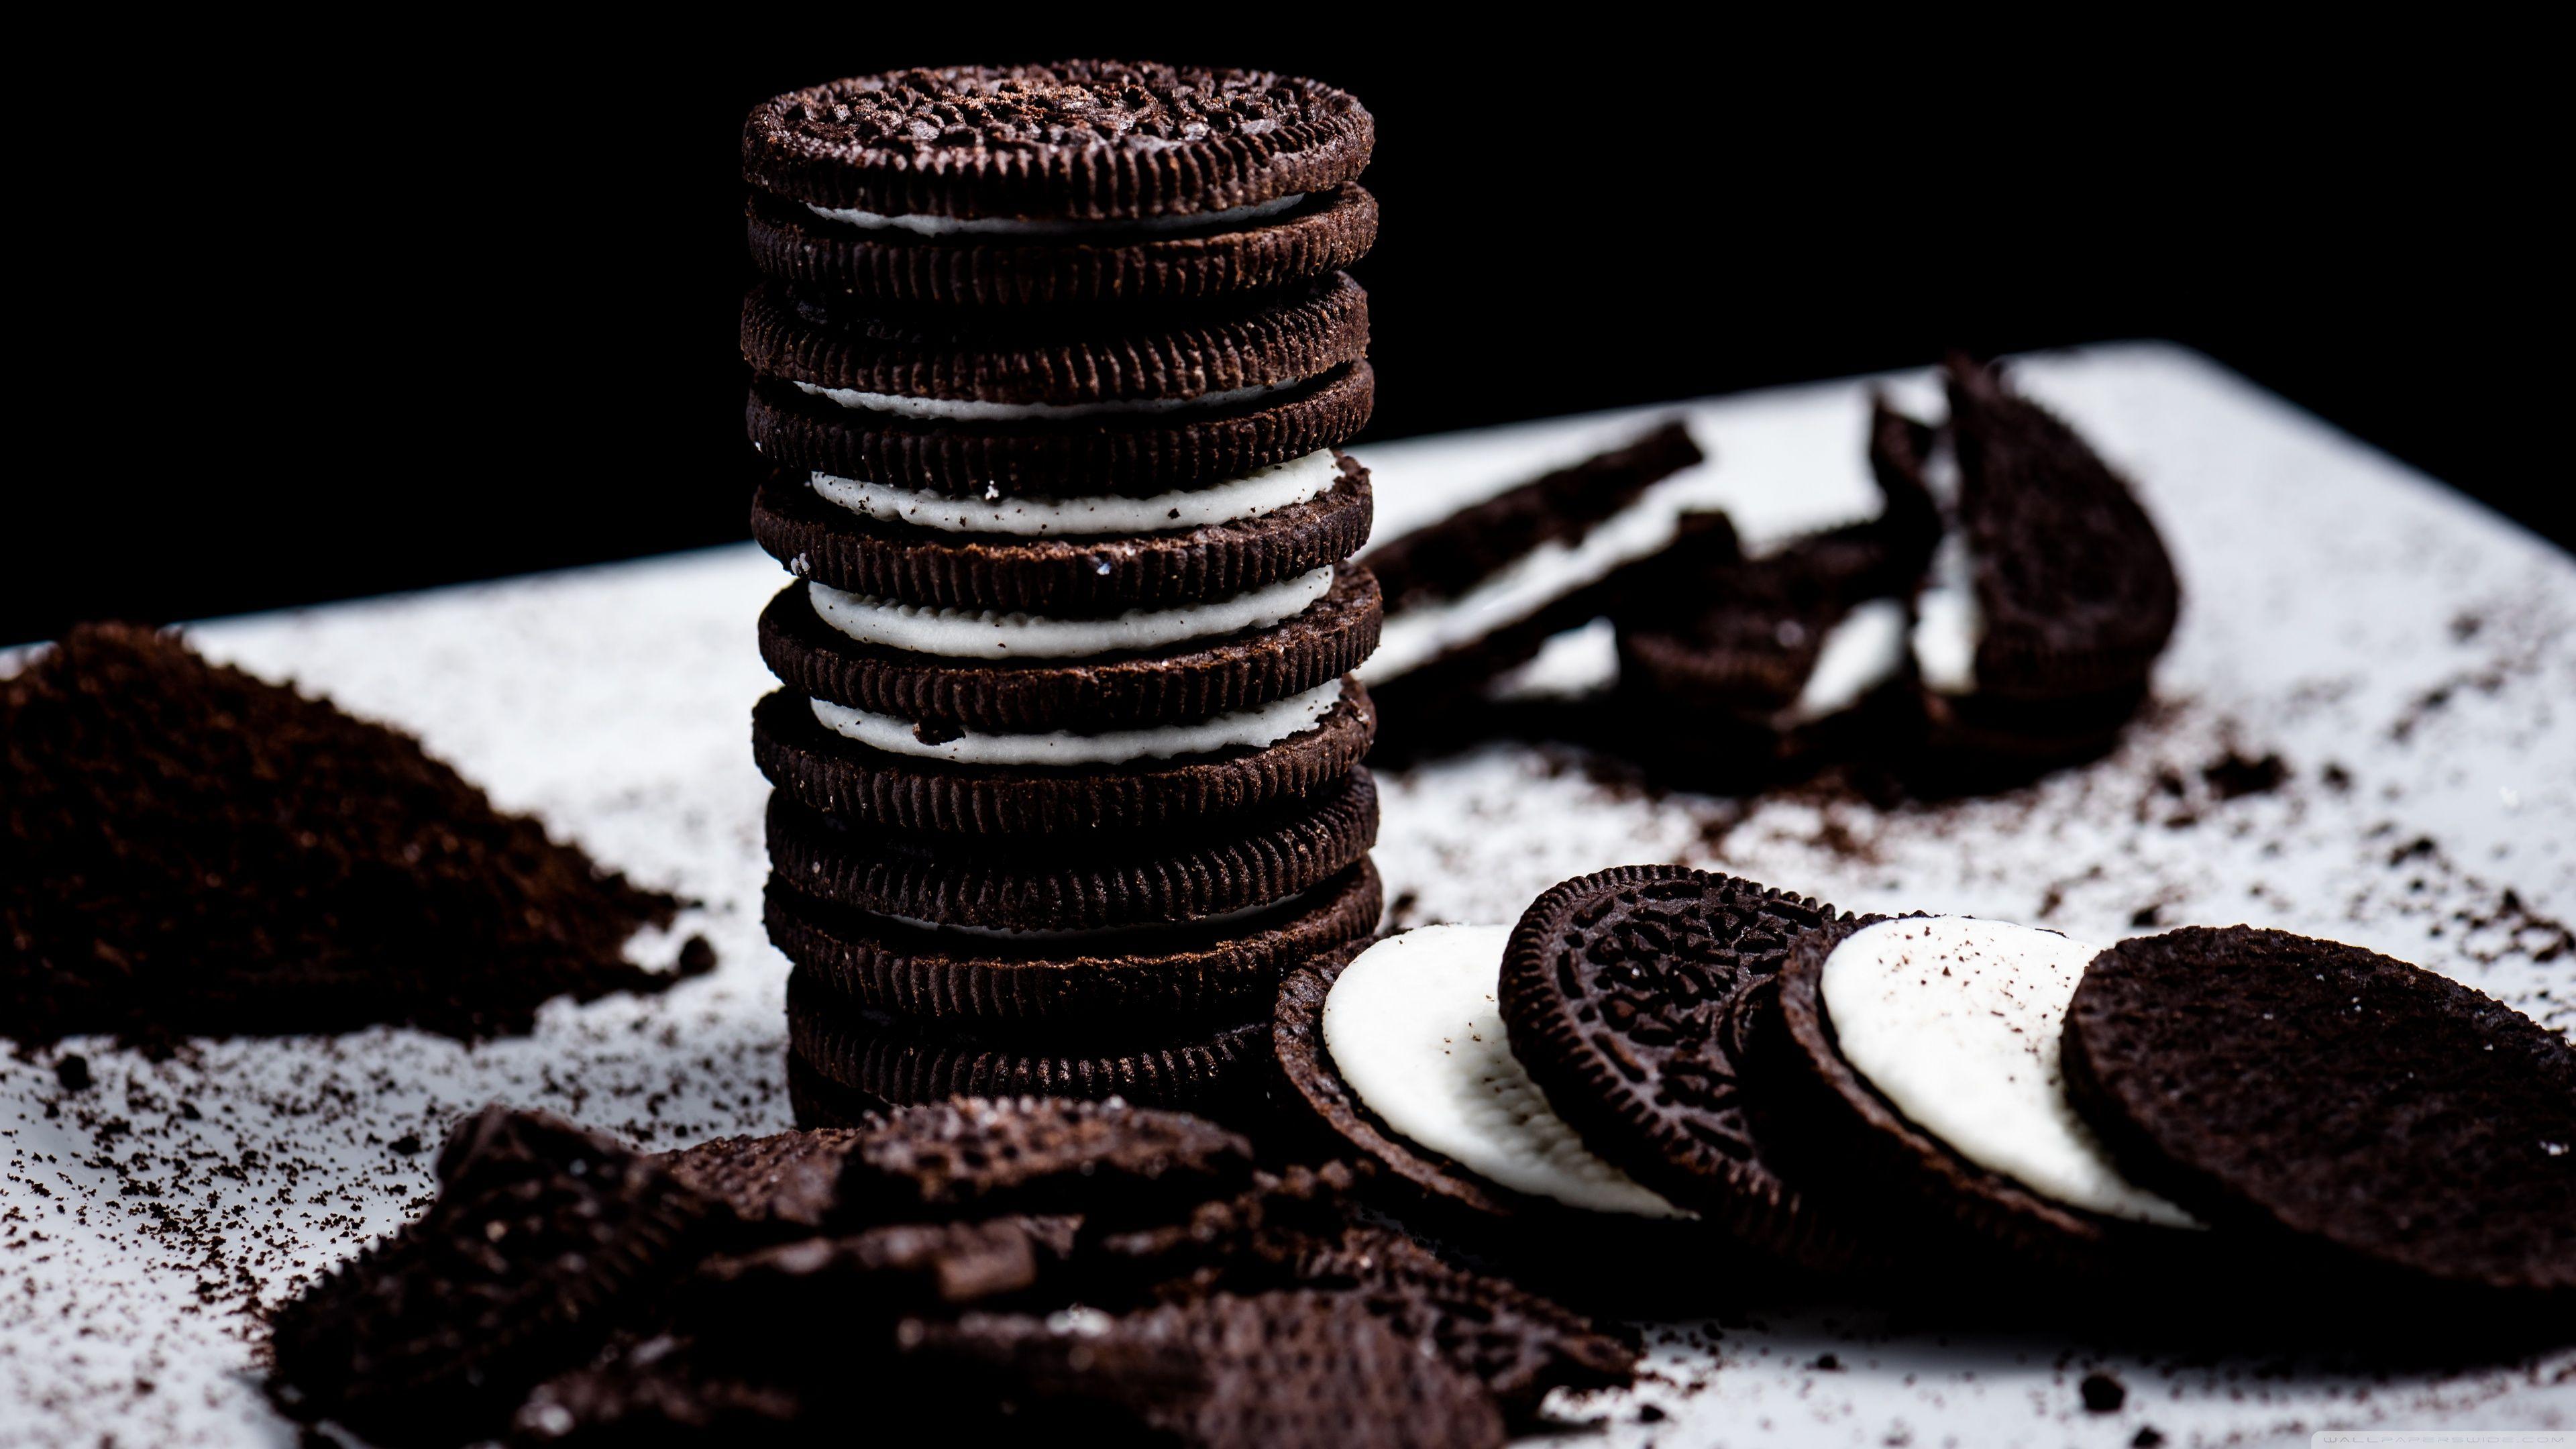 A stack of chocolate sandwich cookies with white cream in the middle - Oreo